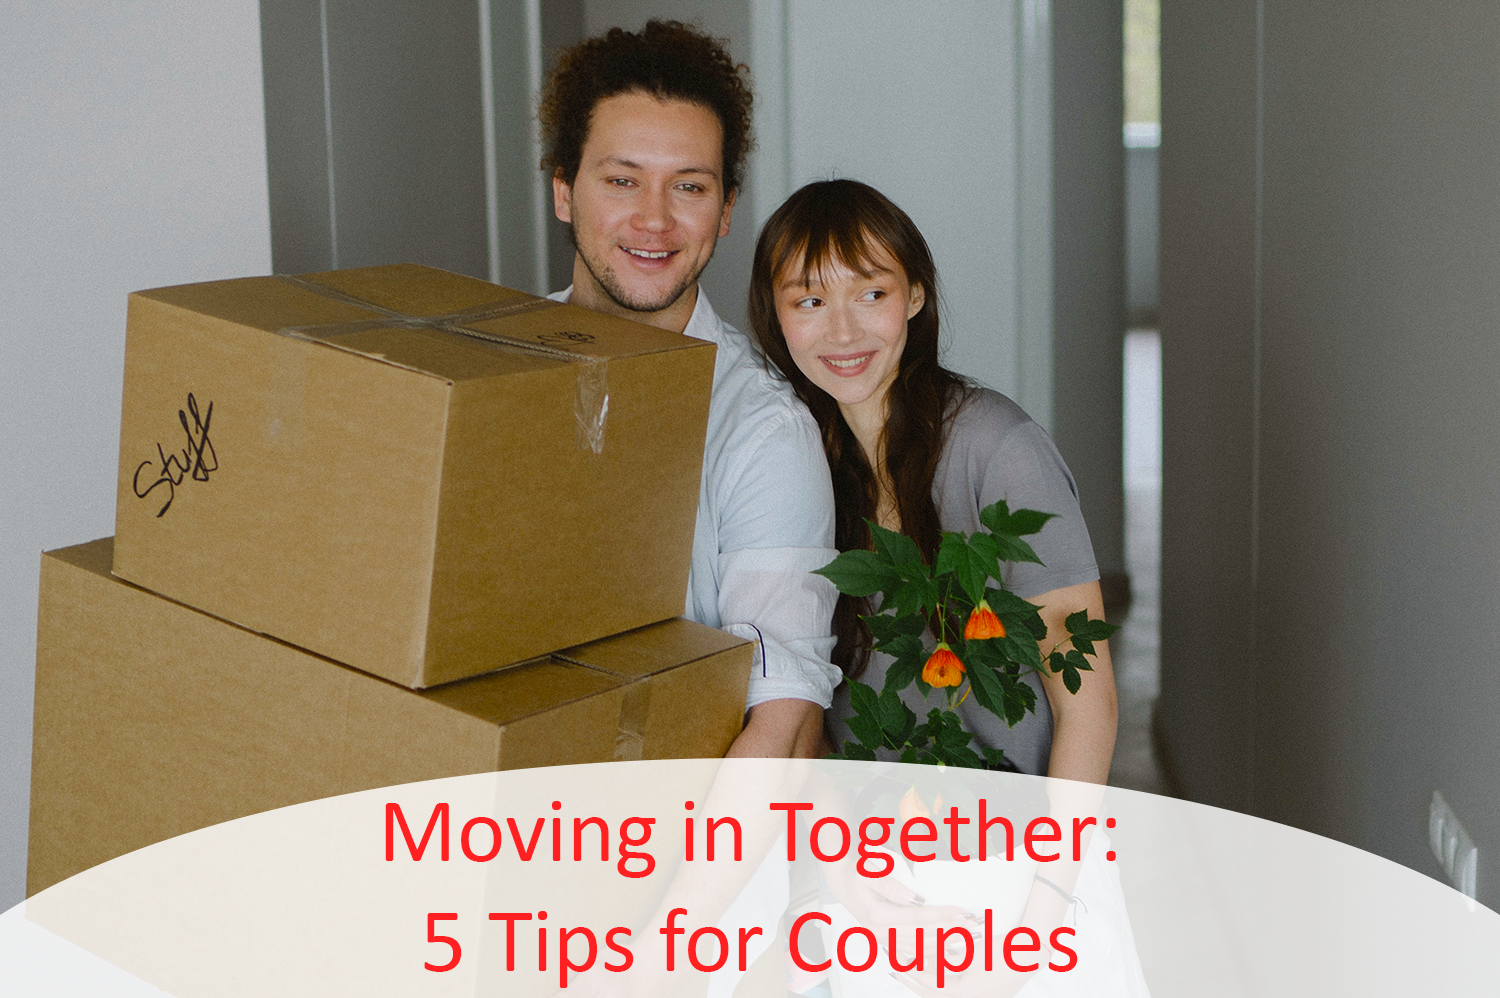 A couple moving in to a new apartment together - the guy is holding two cardboard boxes and the woman is holding a green plant with orange flowers.